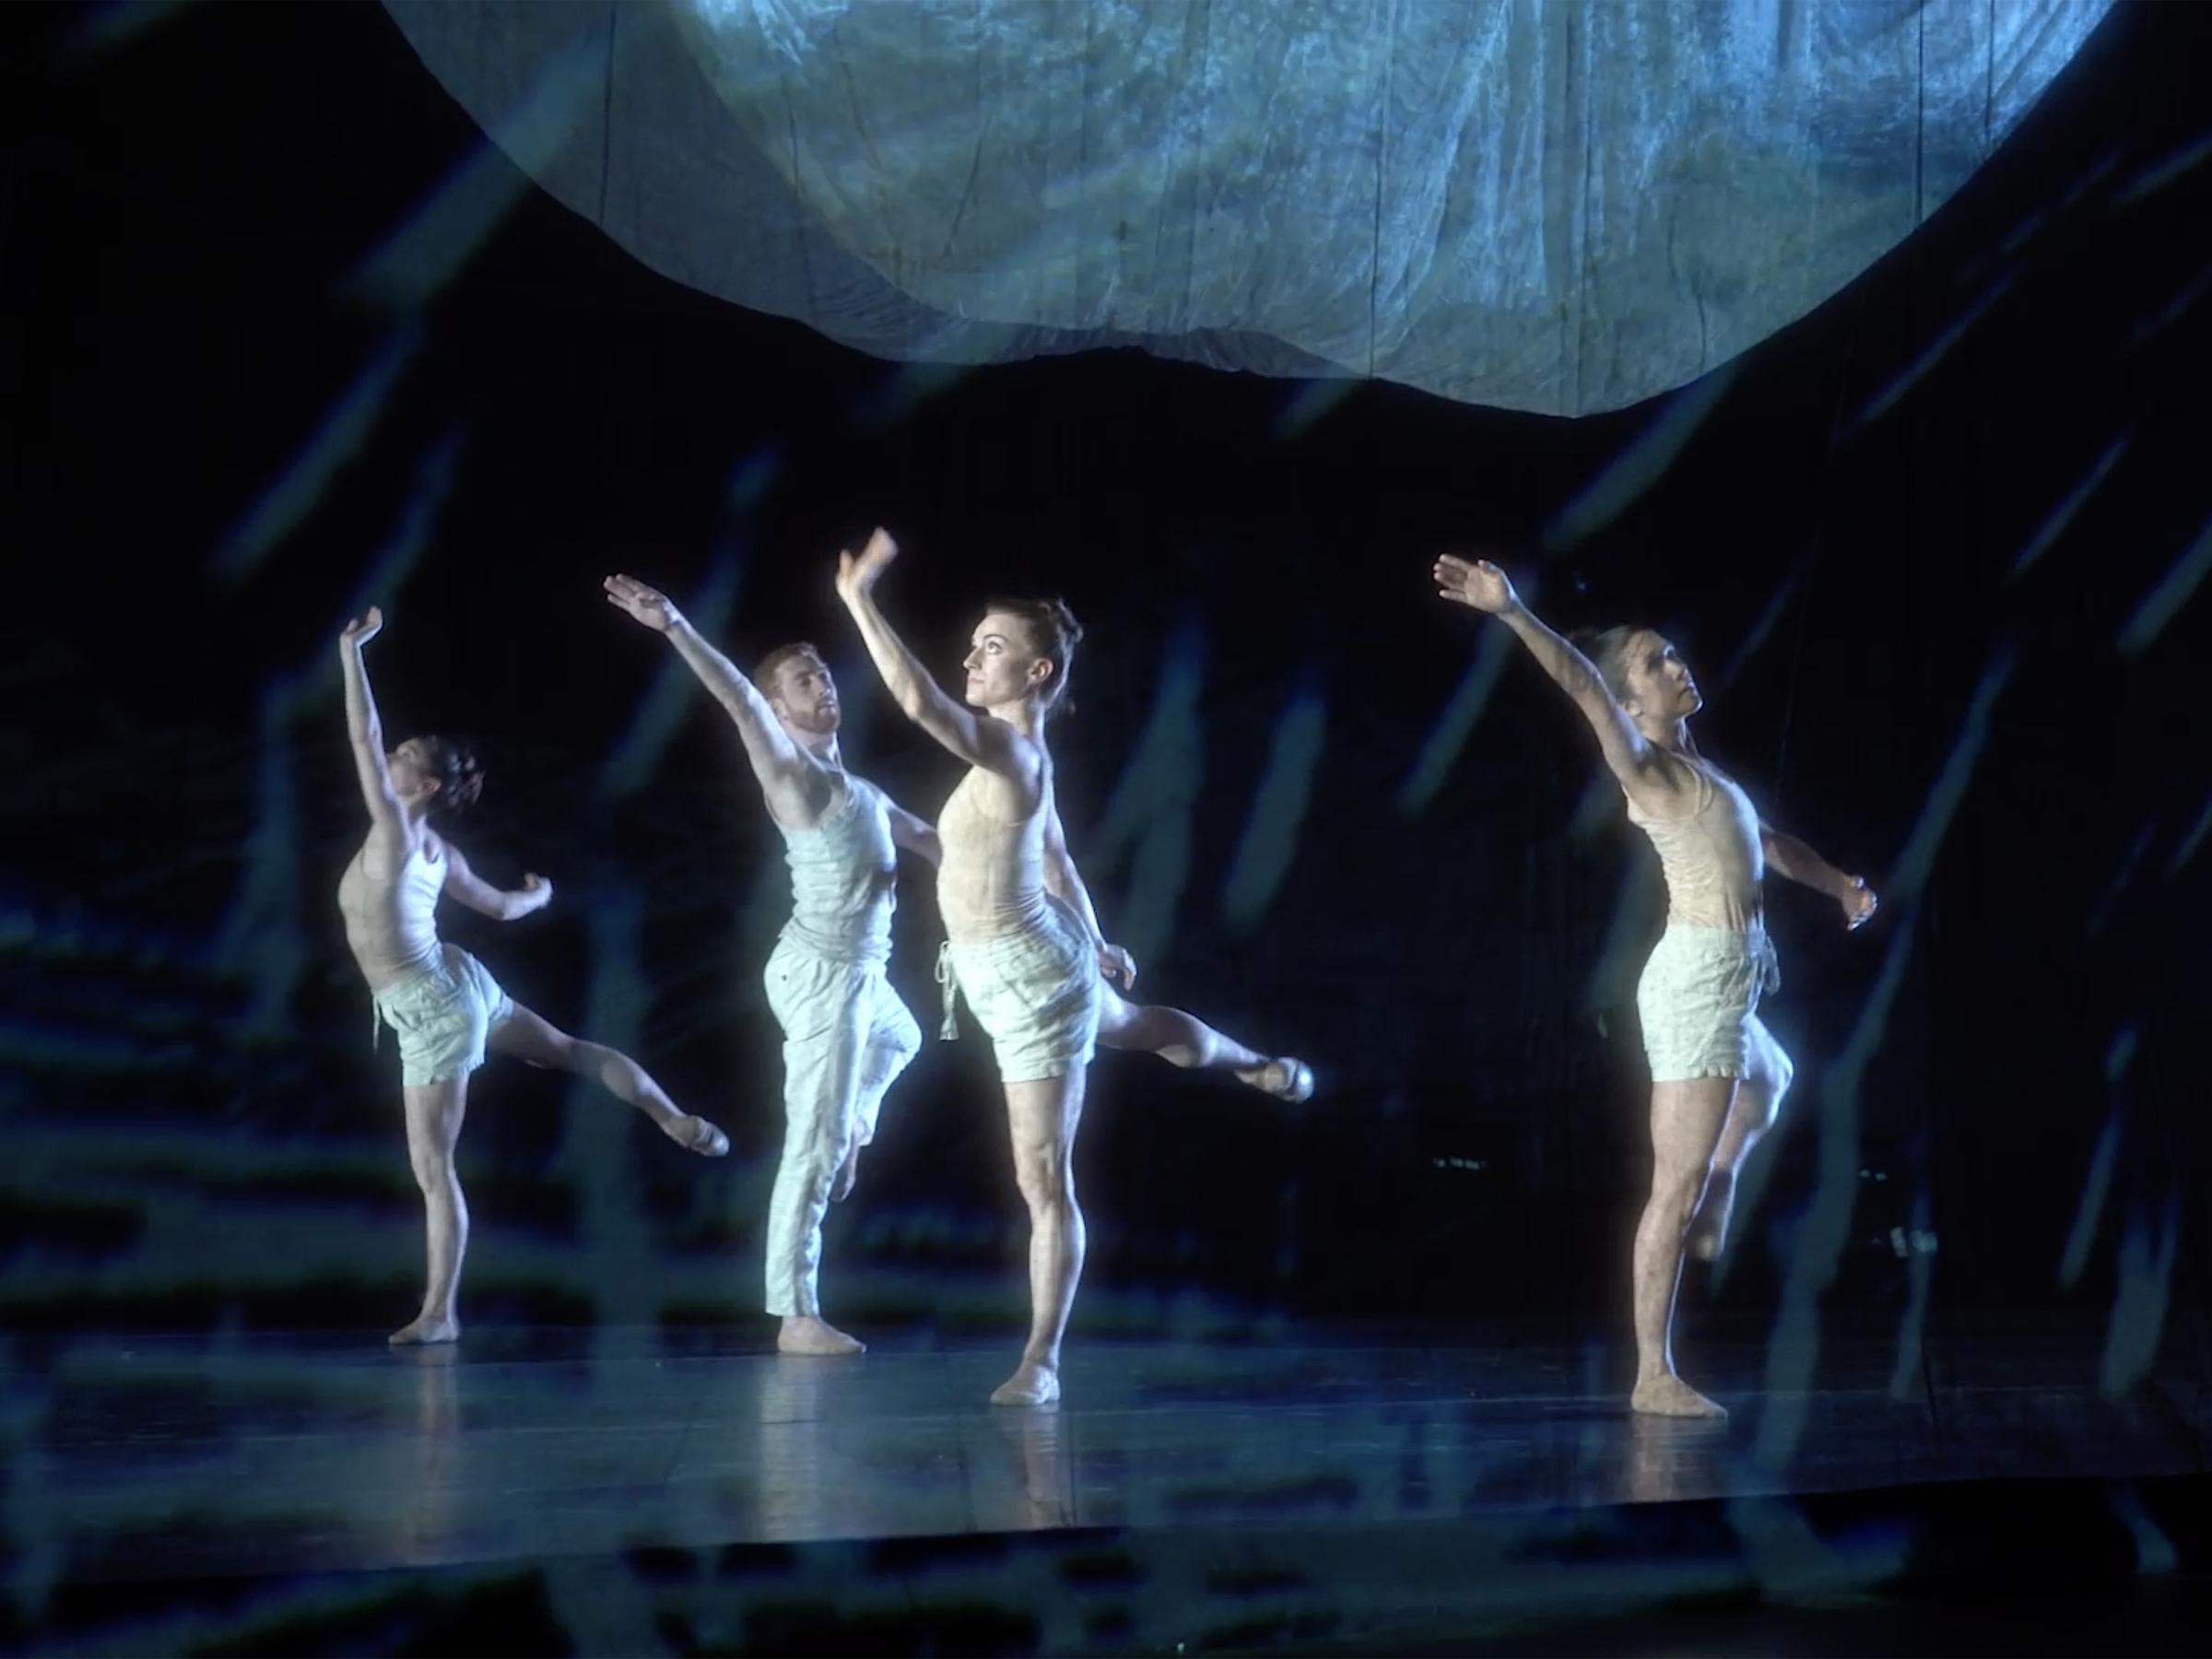 four ballet dancers on a dimly lit stage with an amorphous shape hung above them